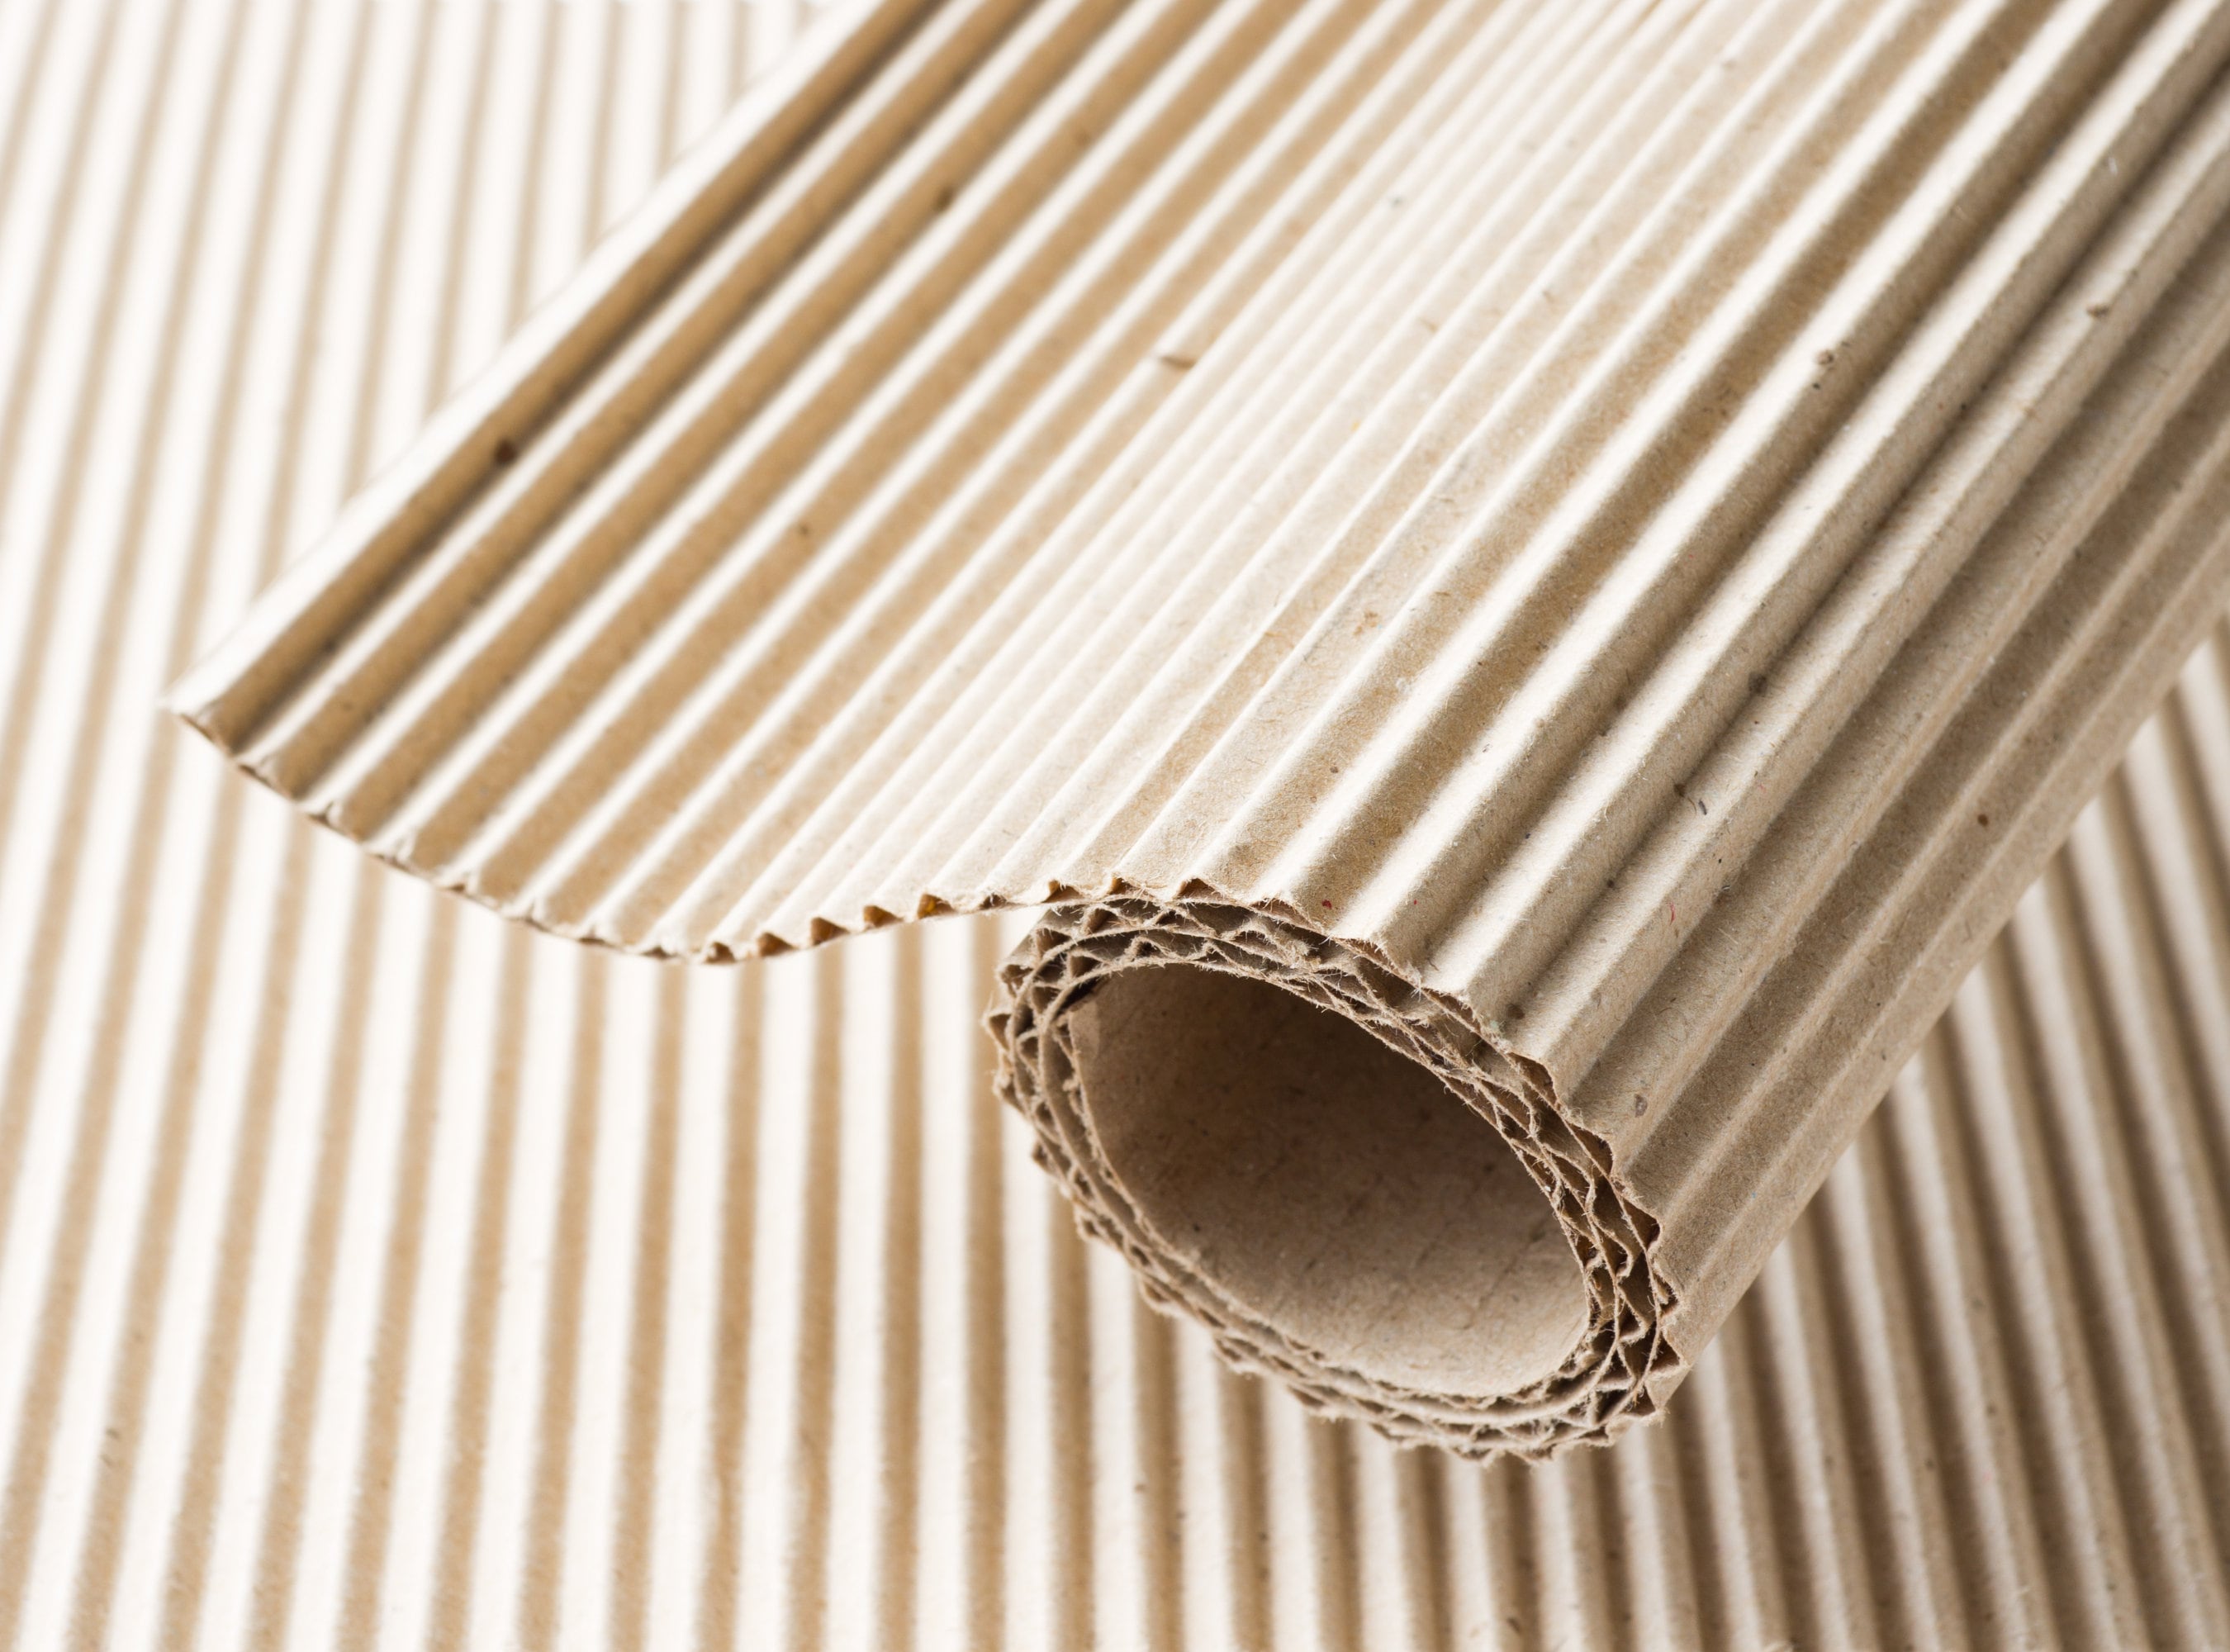 Recycled Corrugated Cardboard Roll 225mm Wide / Protective Packaging Paper  